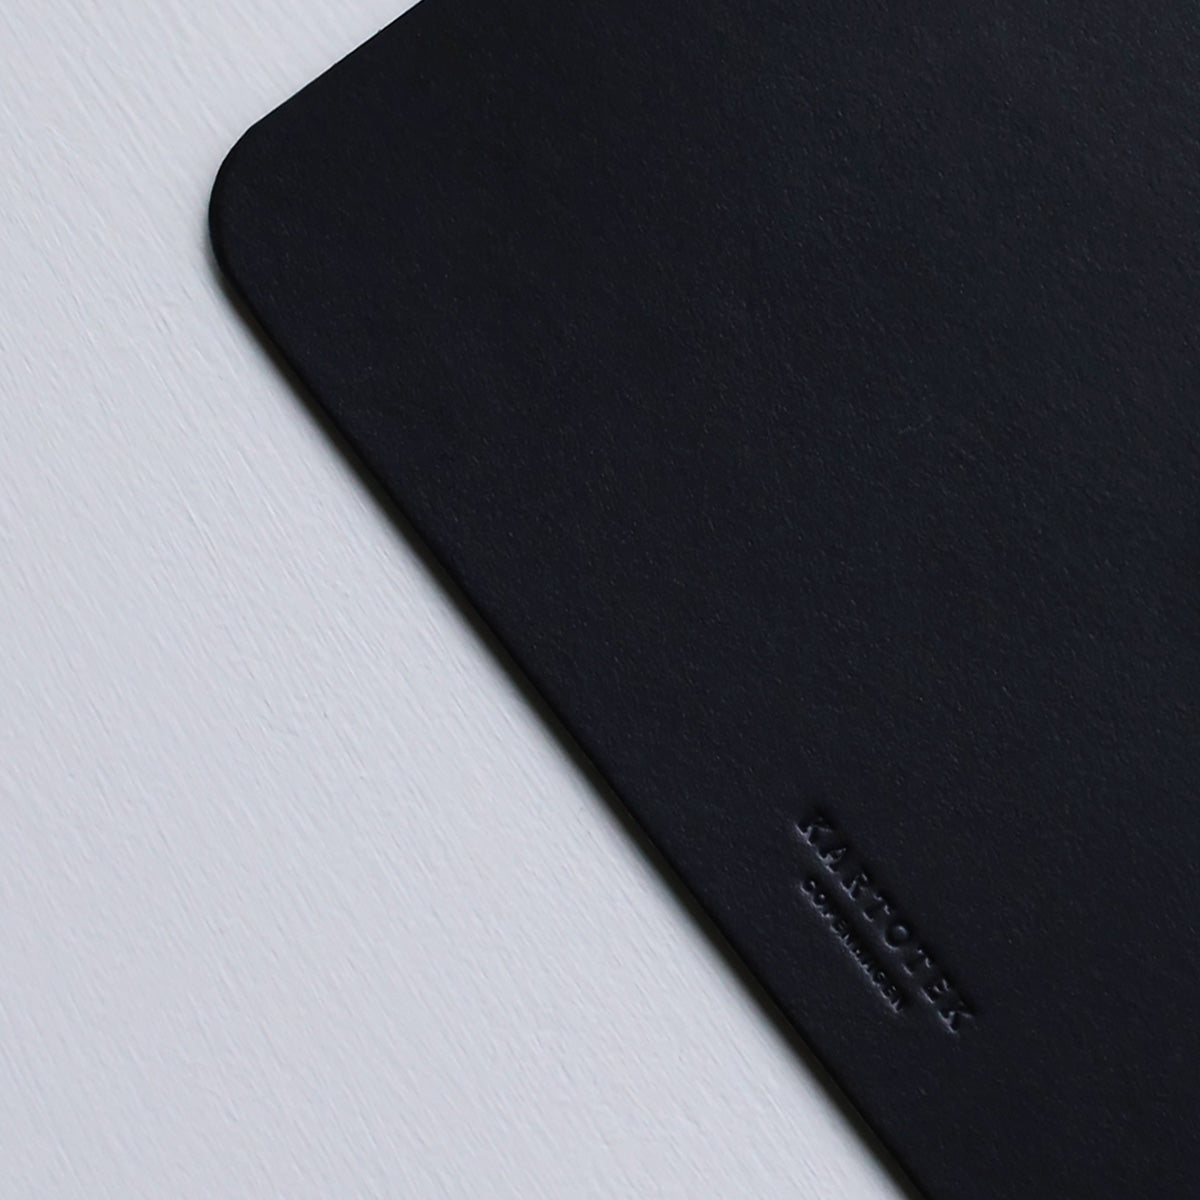 LEATHER MOUSE PAD // BLACK